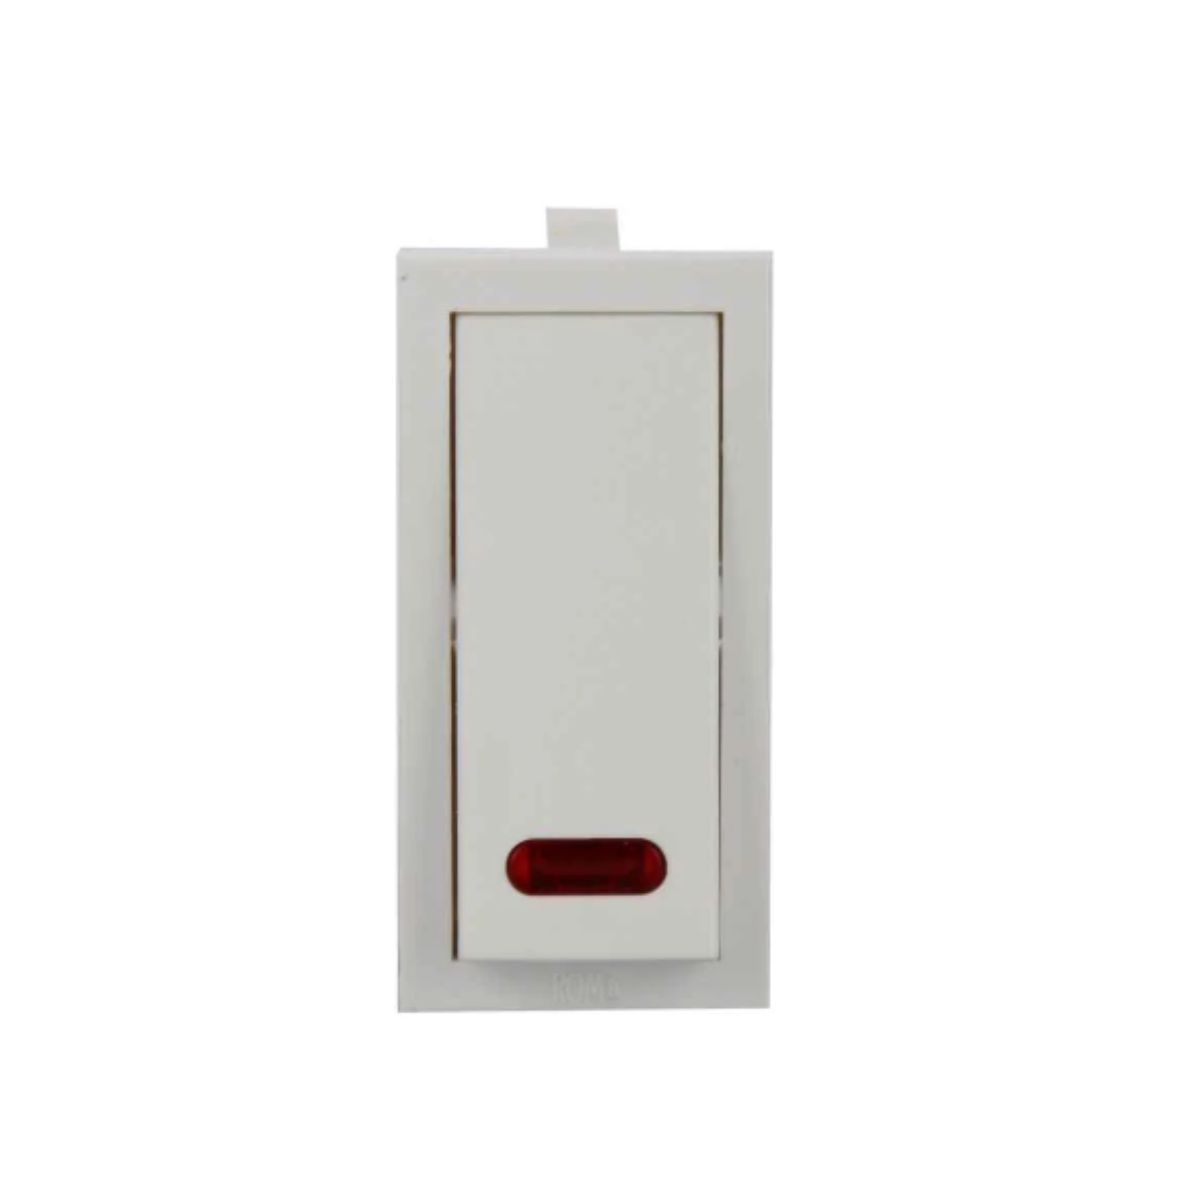 Anchor Roma 1-Way Switch with Neon 21077, White, 20 amp